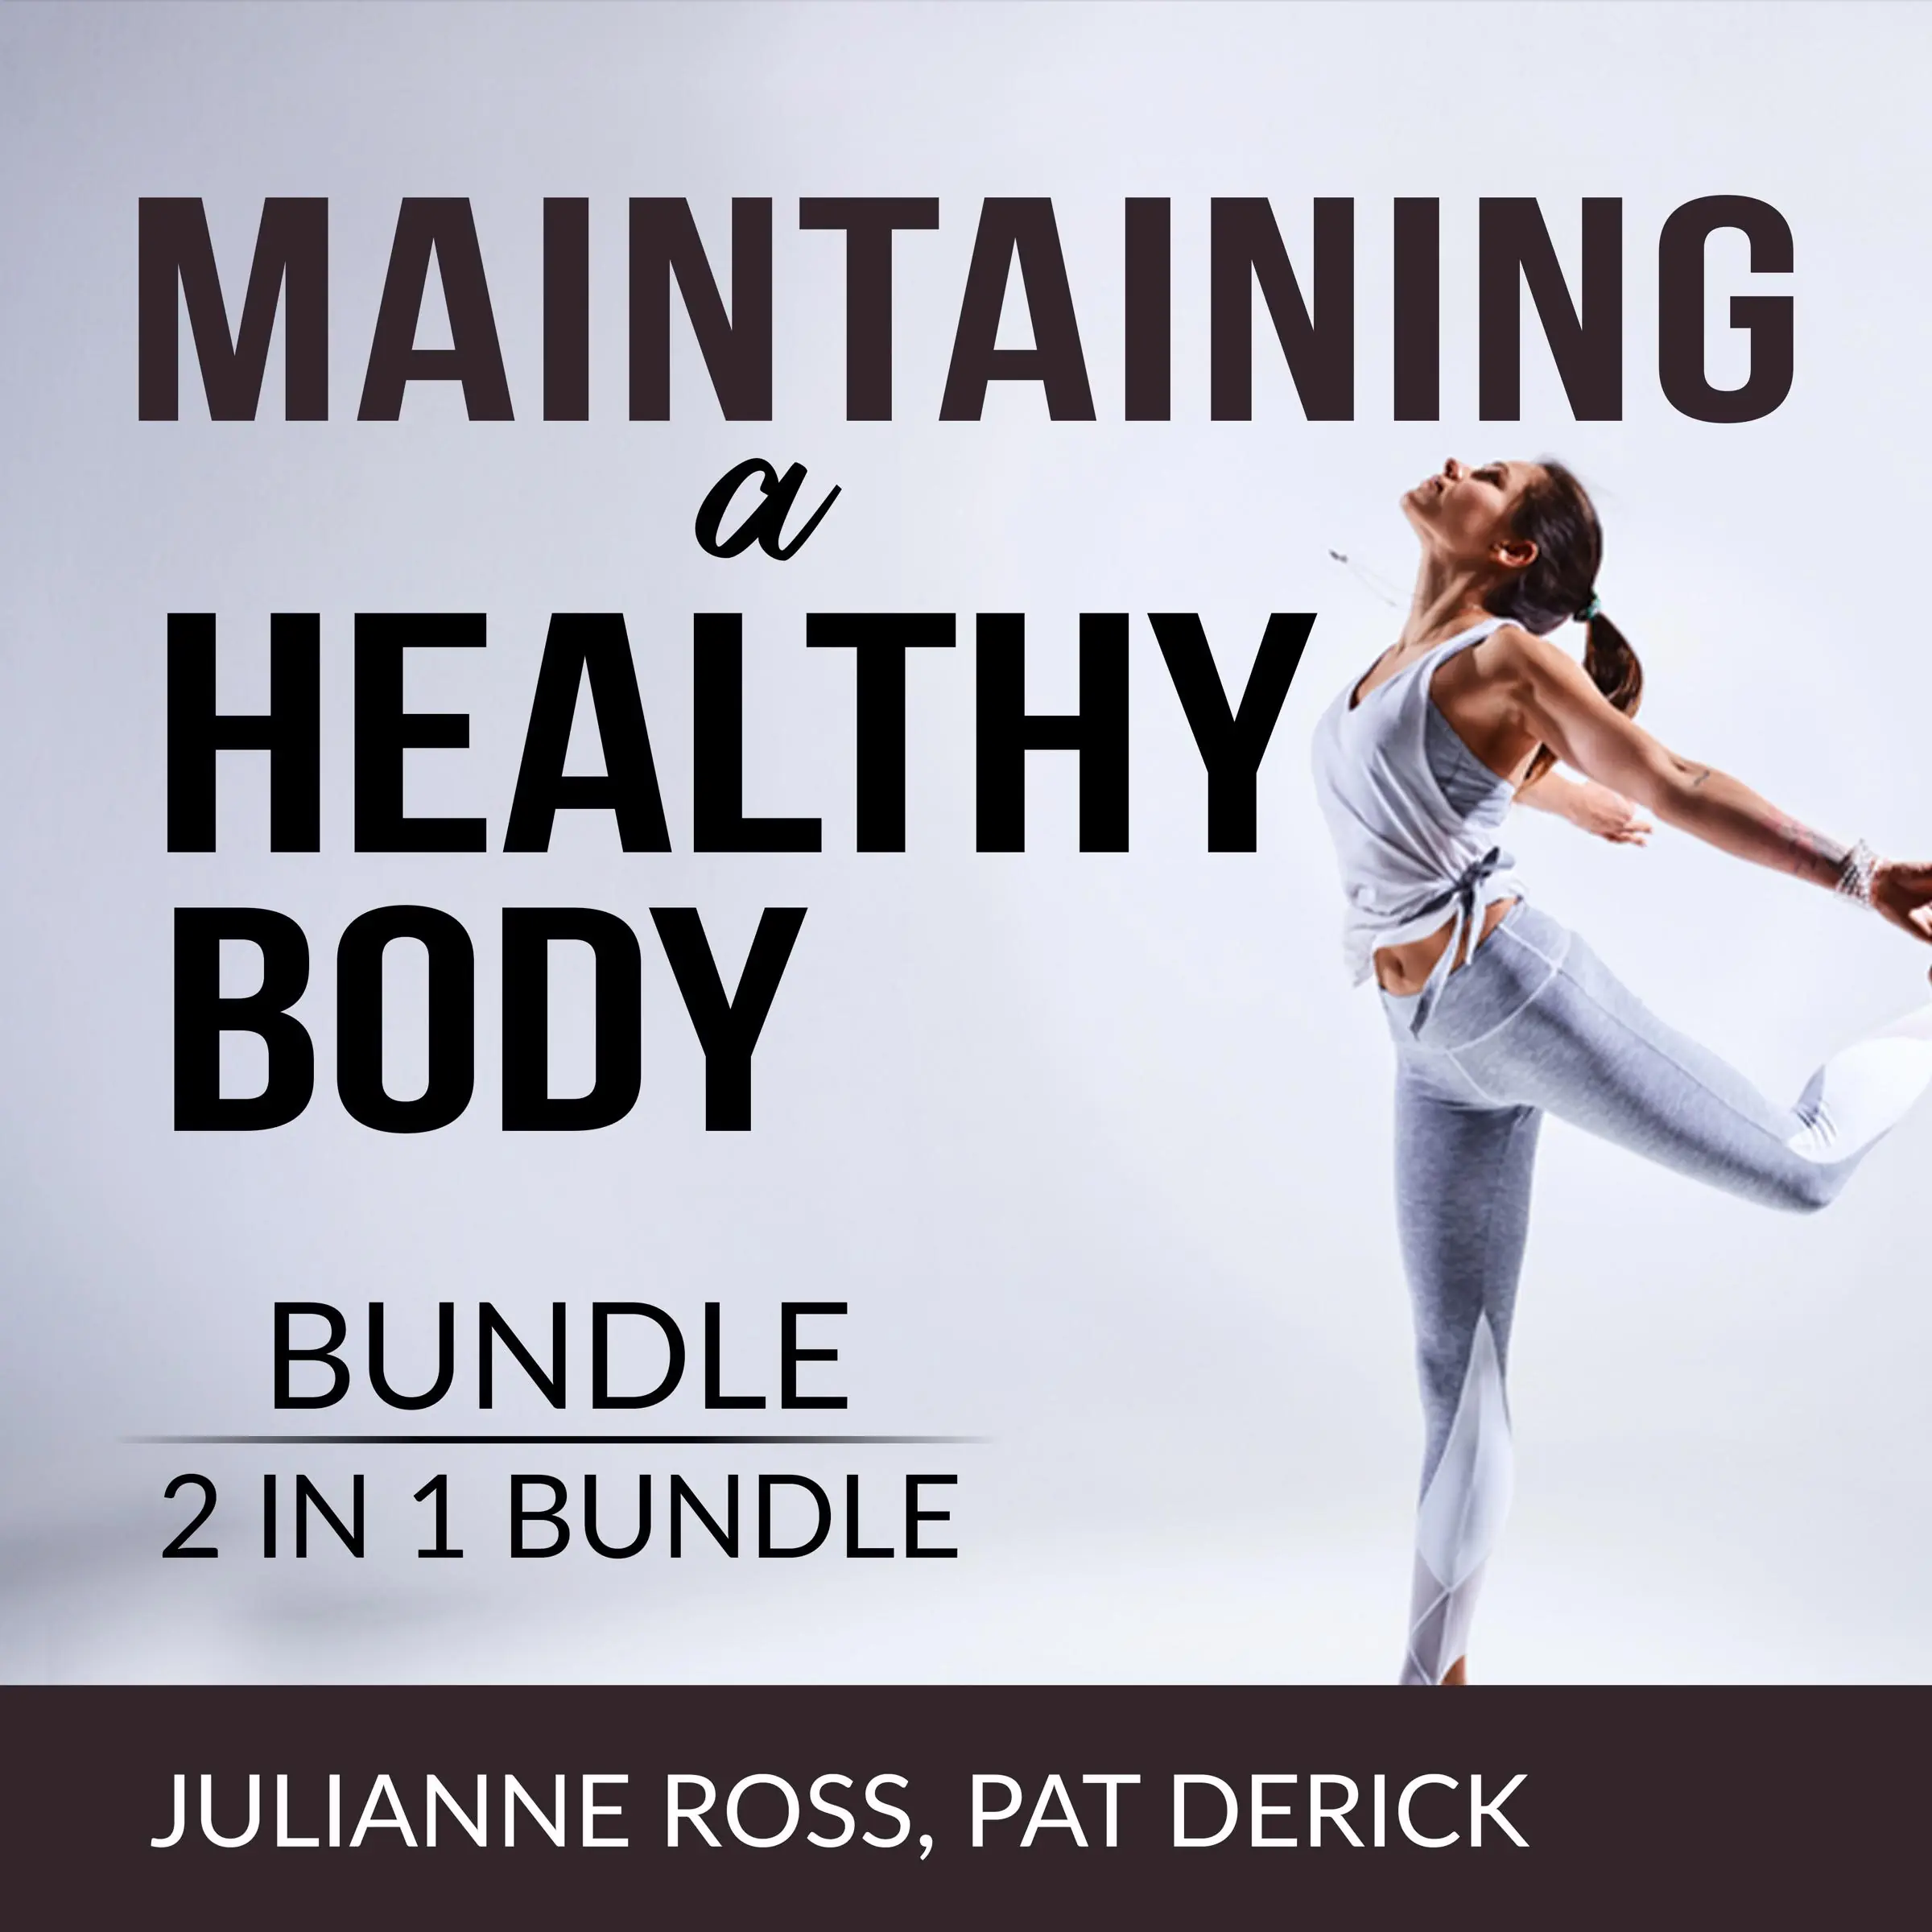 Maintaining a Healthy Body Bundle, 2 IN 1 Bundle: Living With Your Body and Counting Calories Audiobook by and Pat Derick